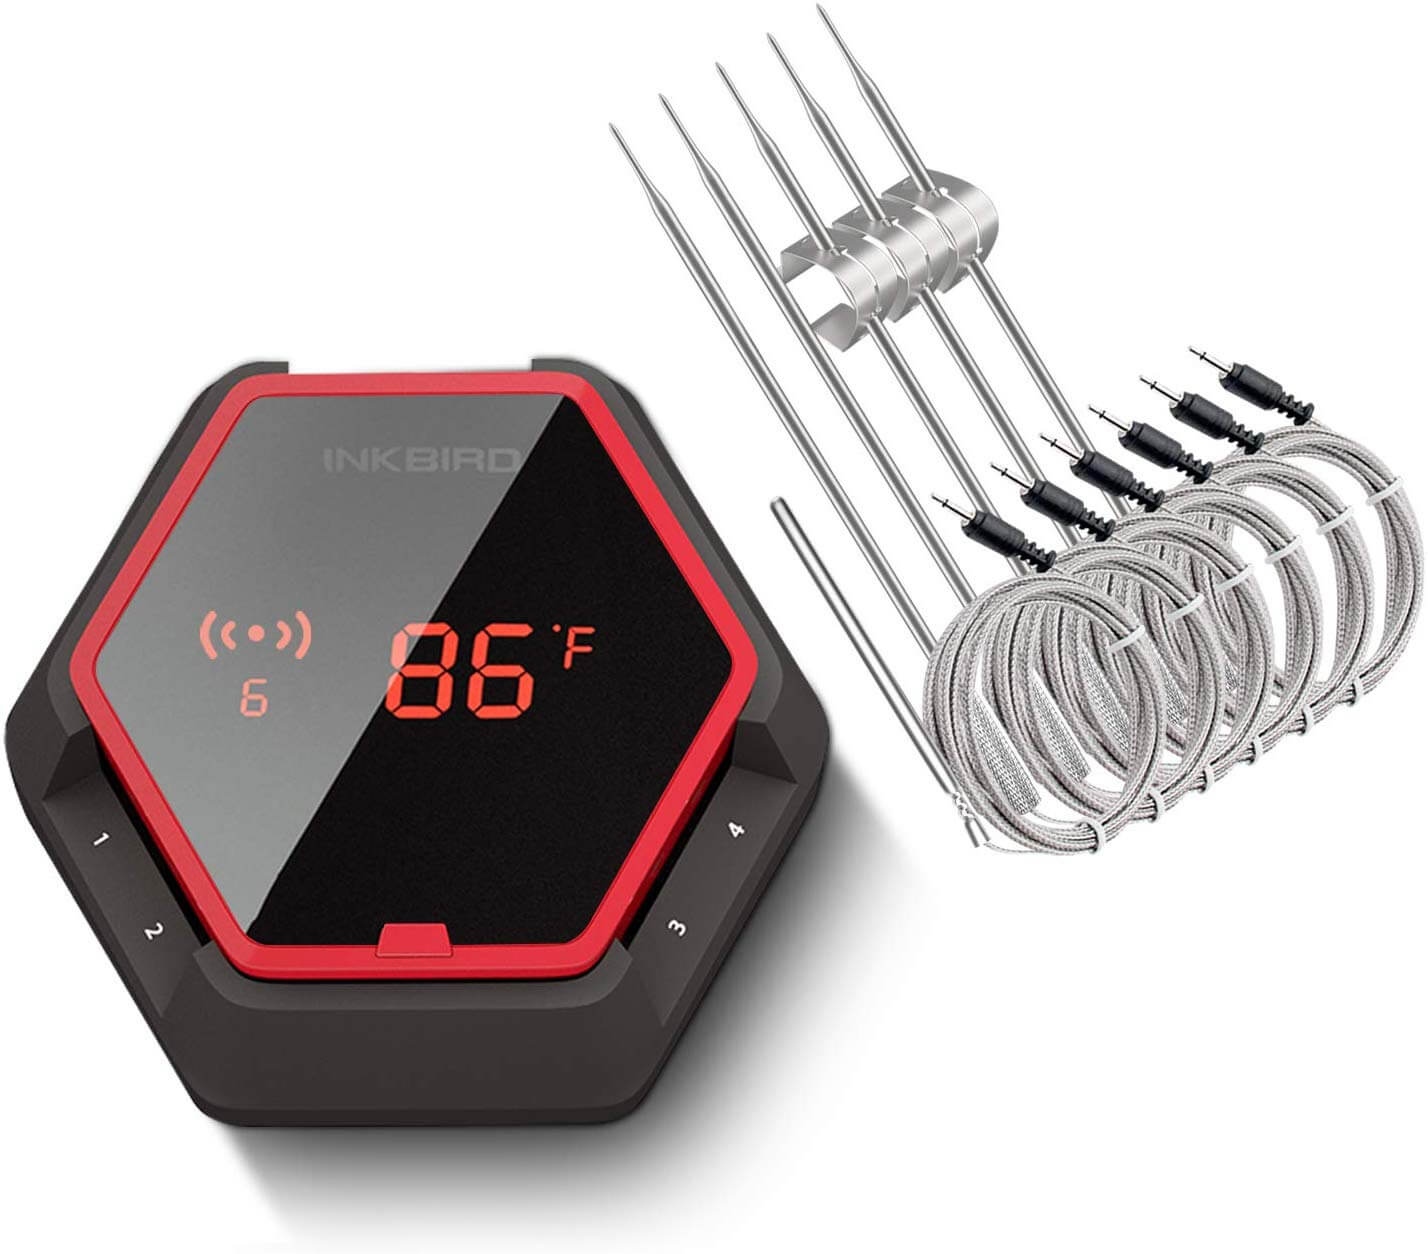 Bluetooth Meat Thermometer: 8 Best Reviews - [Honest Guide]